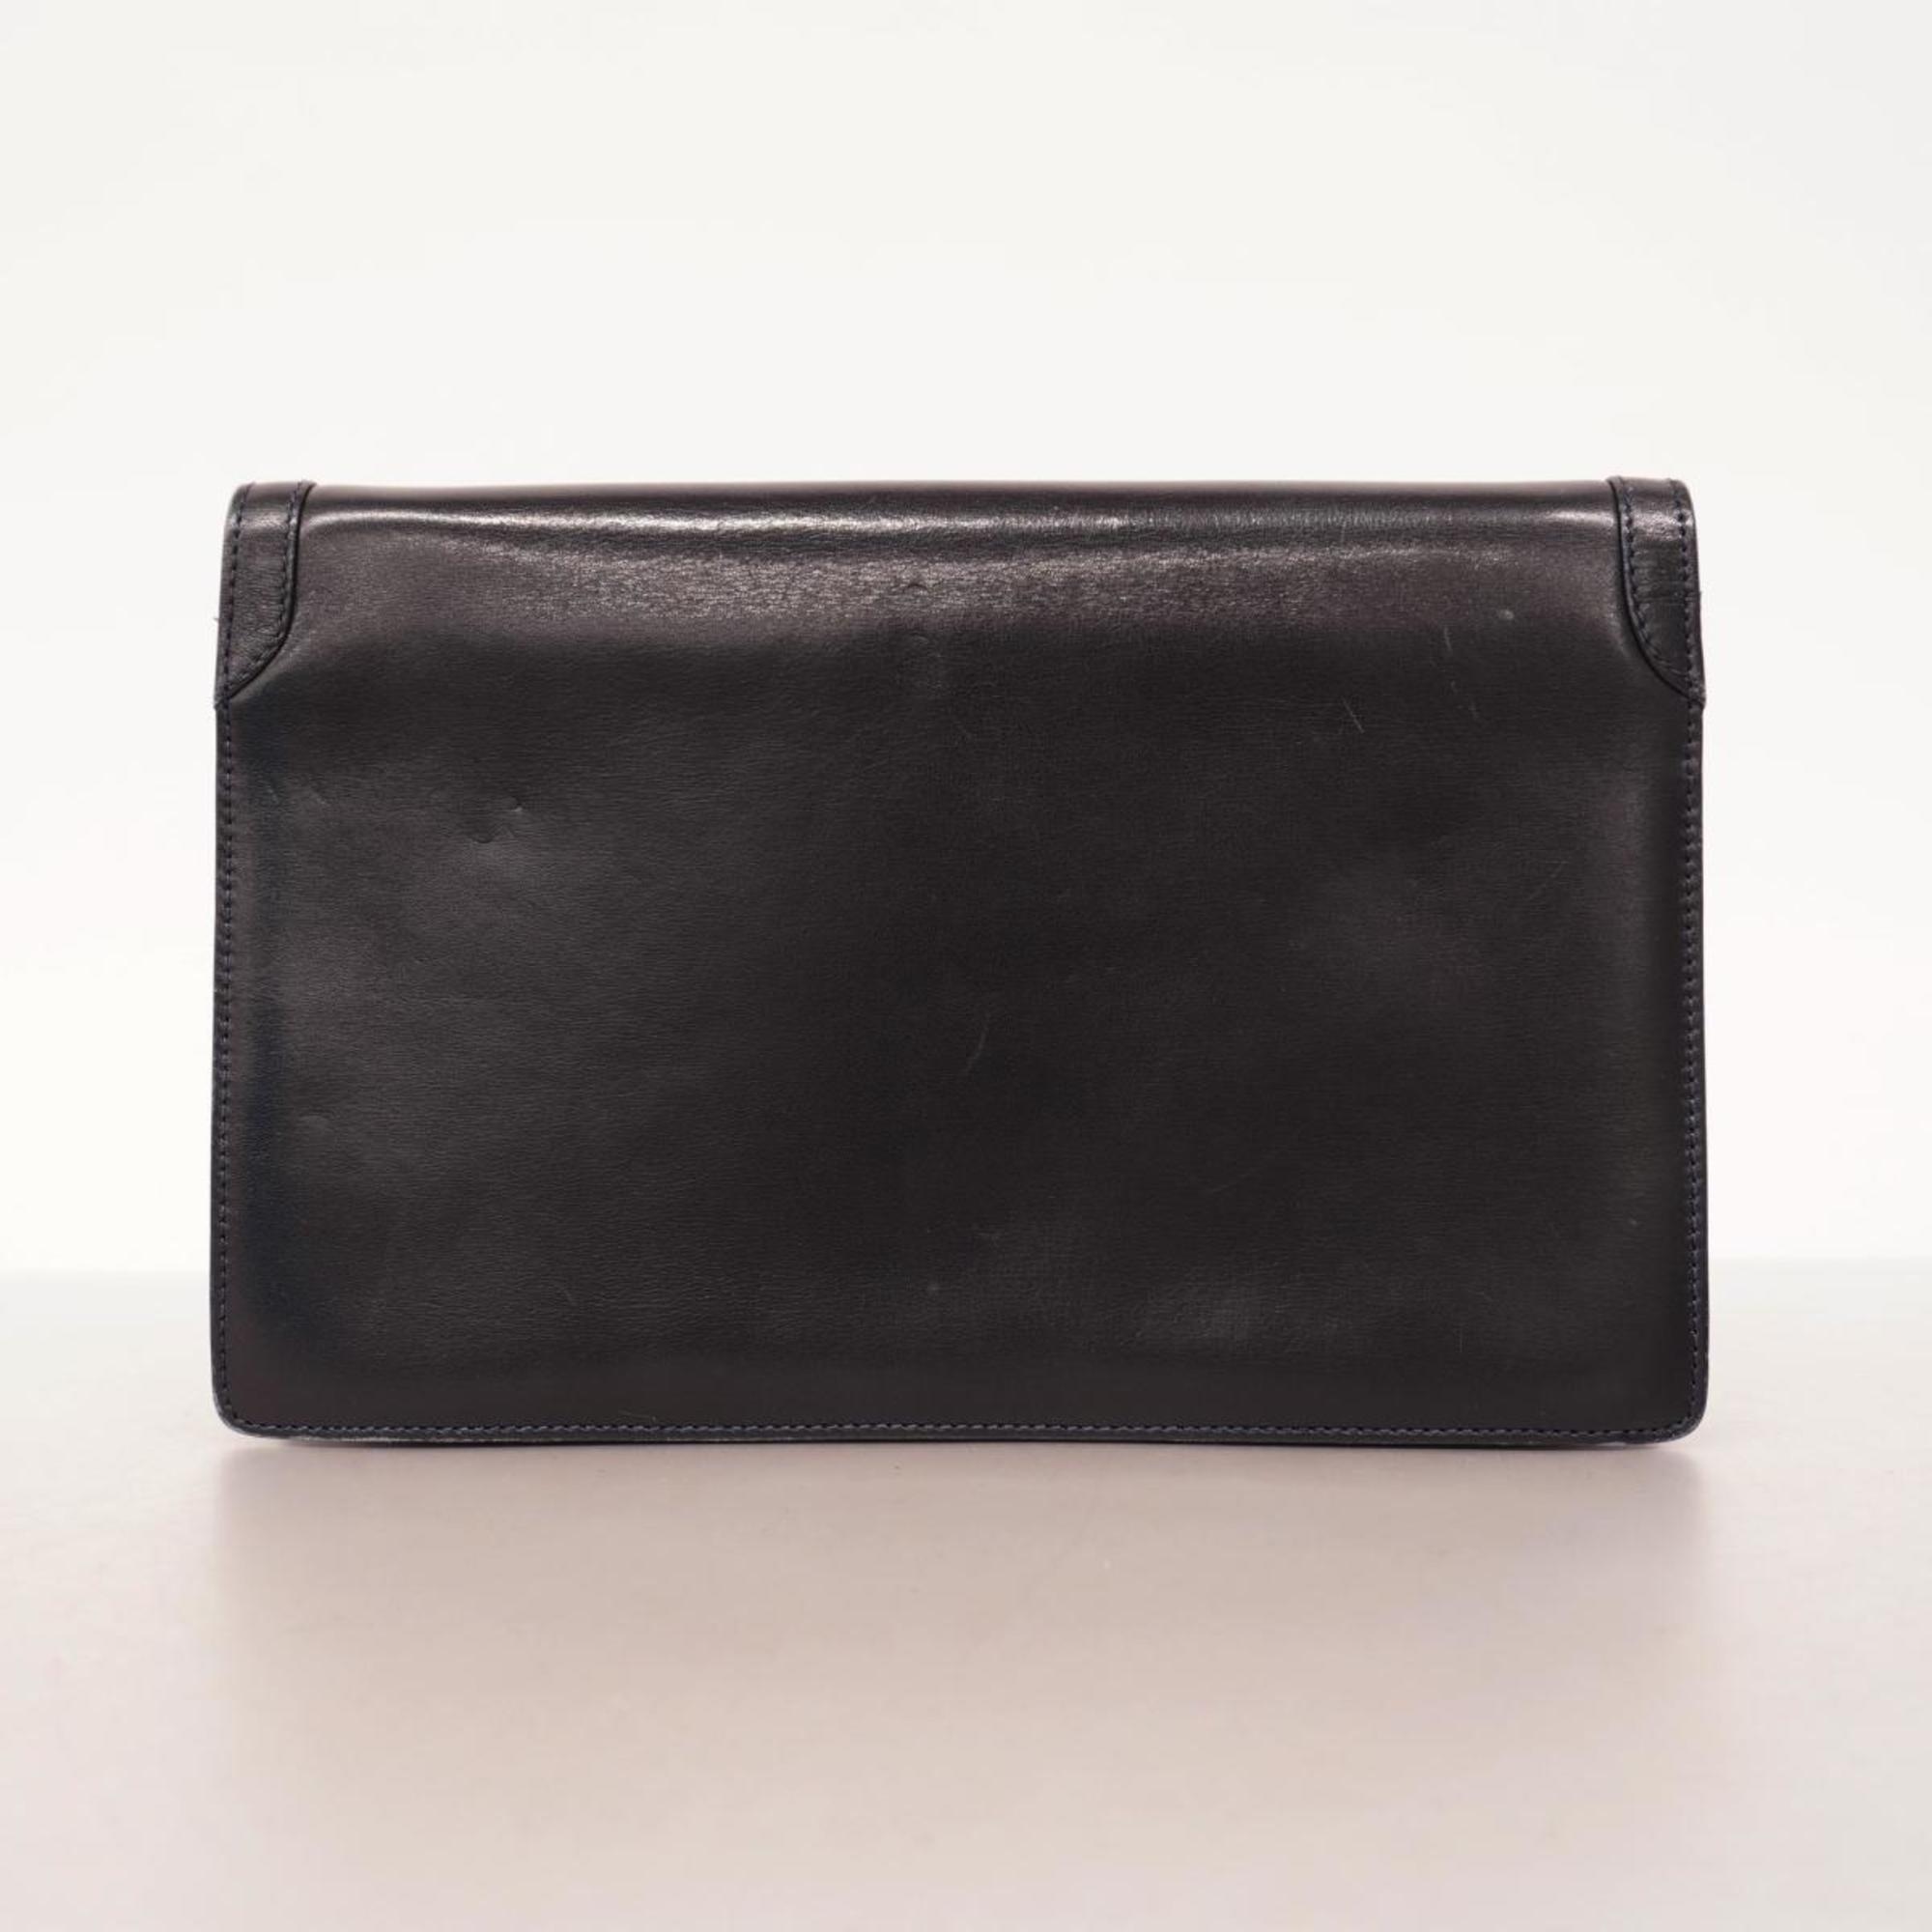 Gucci clutch bag, old leather, black, ladies